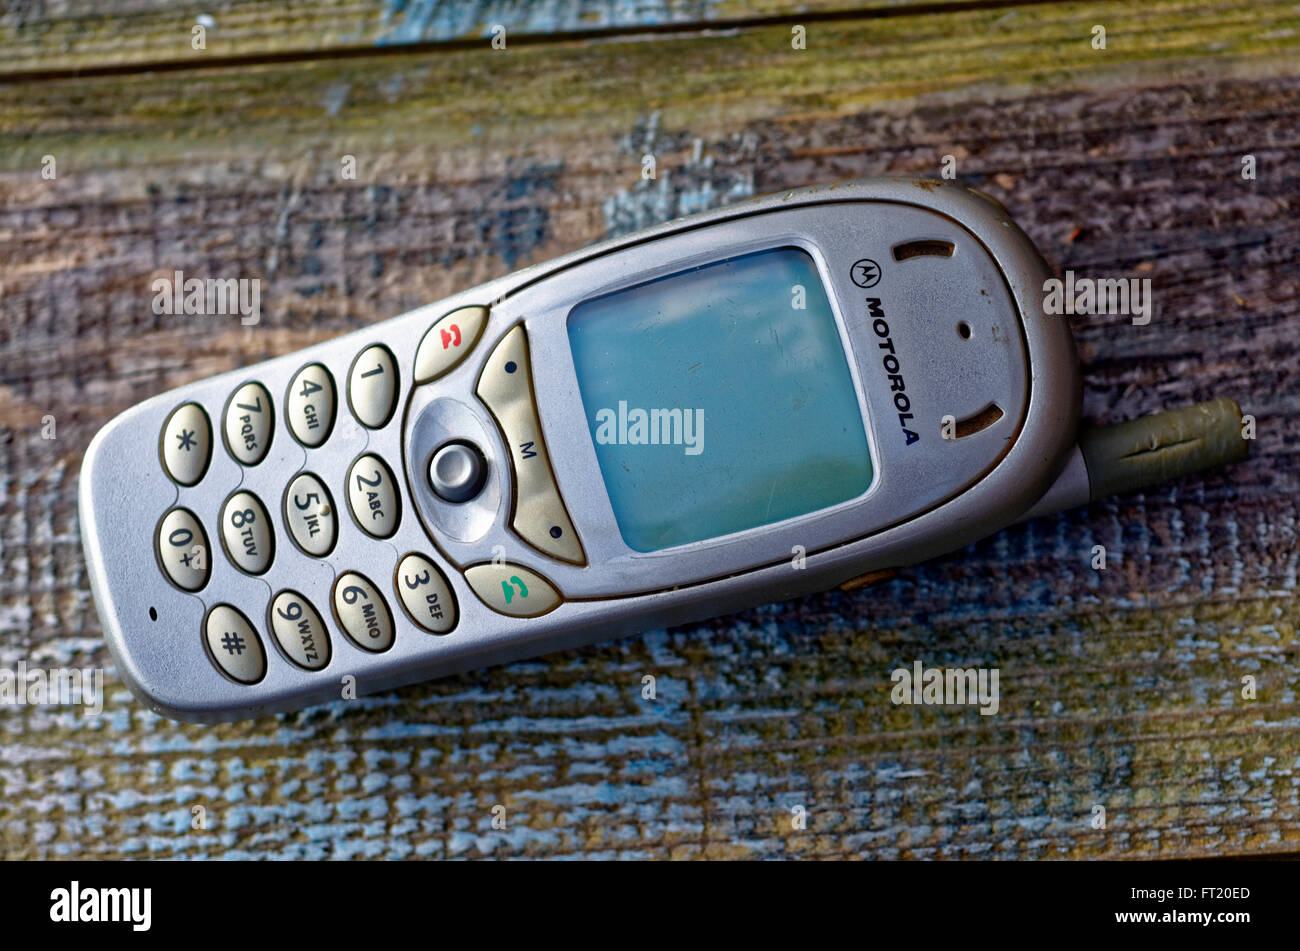 Motorola T280 Mobile Phone, First introduced in 2001 Stock Photo